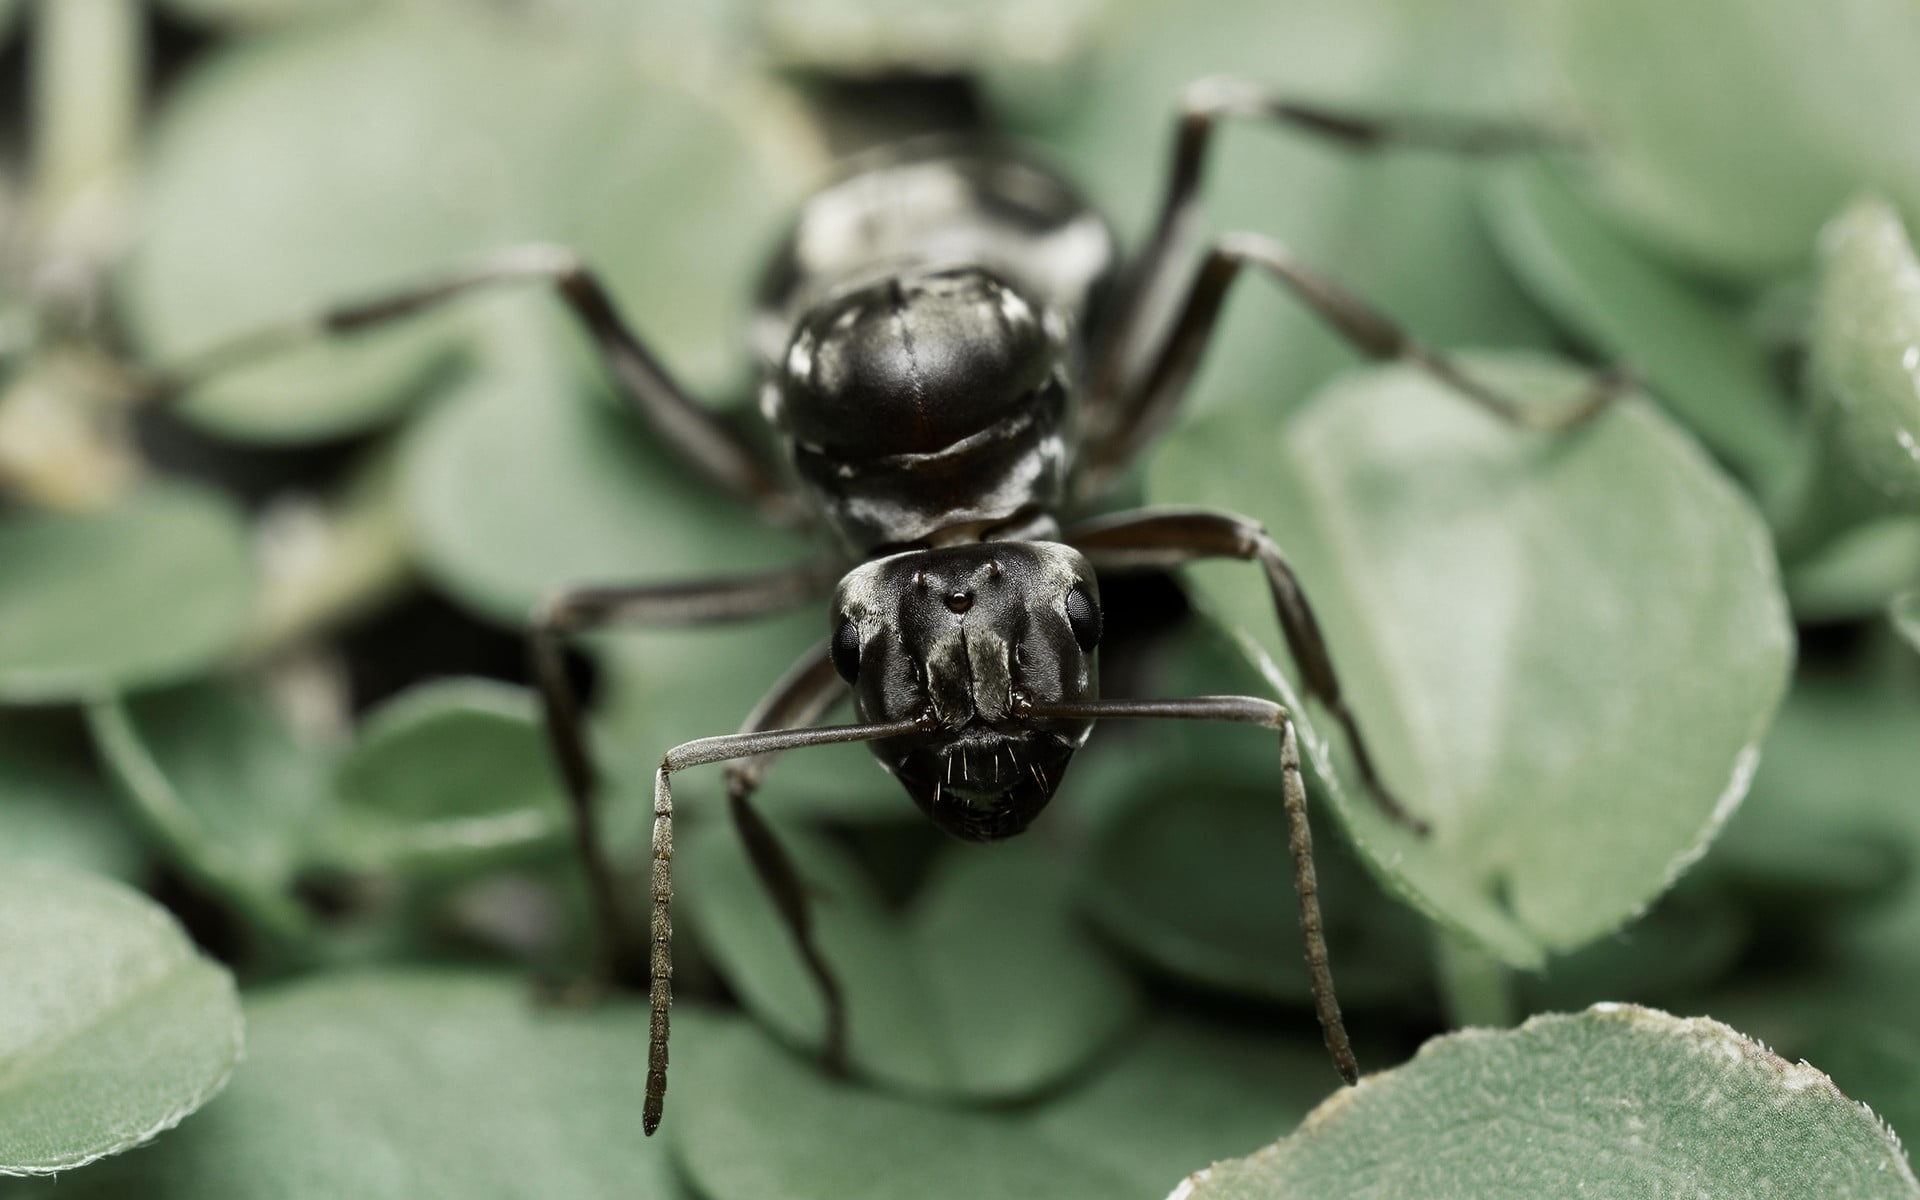 black carpenter ant, ants, nature, insect, macro